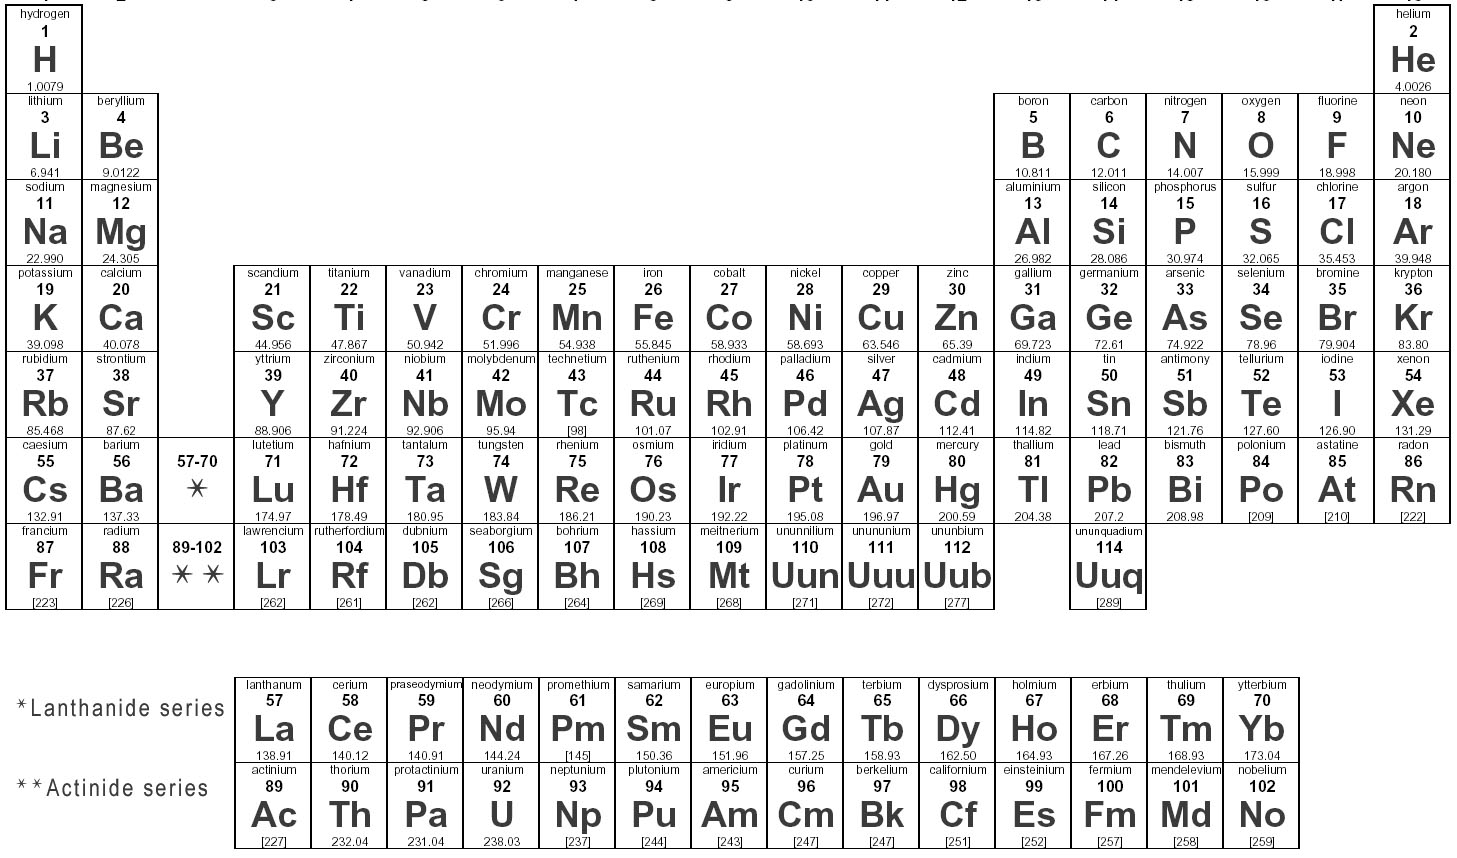 As Periodic Table of Elements Image